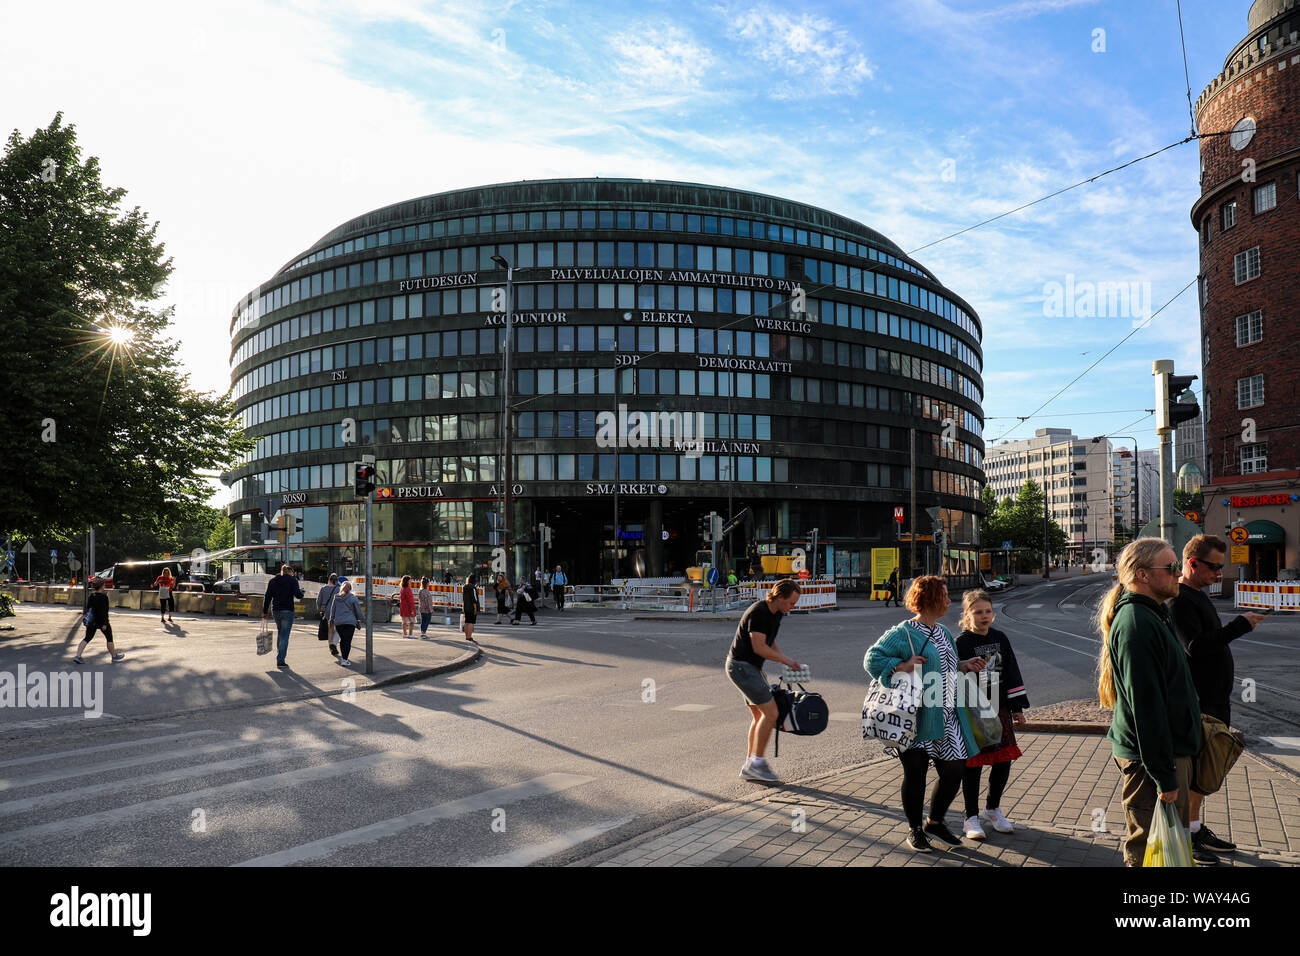 Ympyrätalo - a circle-shaped office building backlit by evening sun - in Hakaniemi district of Helsinki, Finland Stock Photo